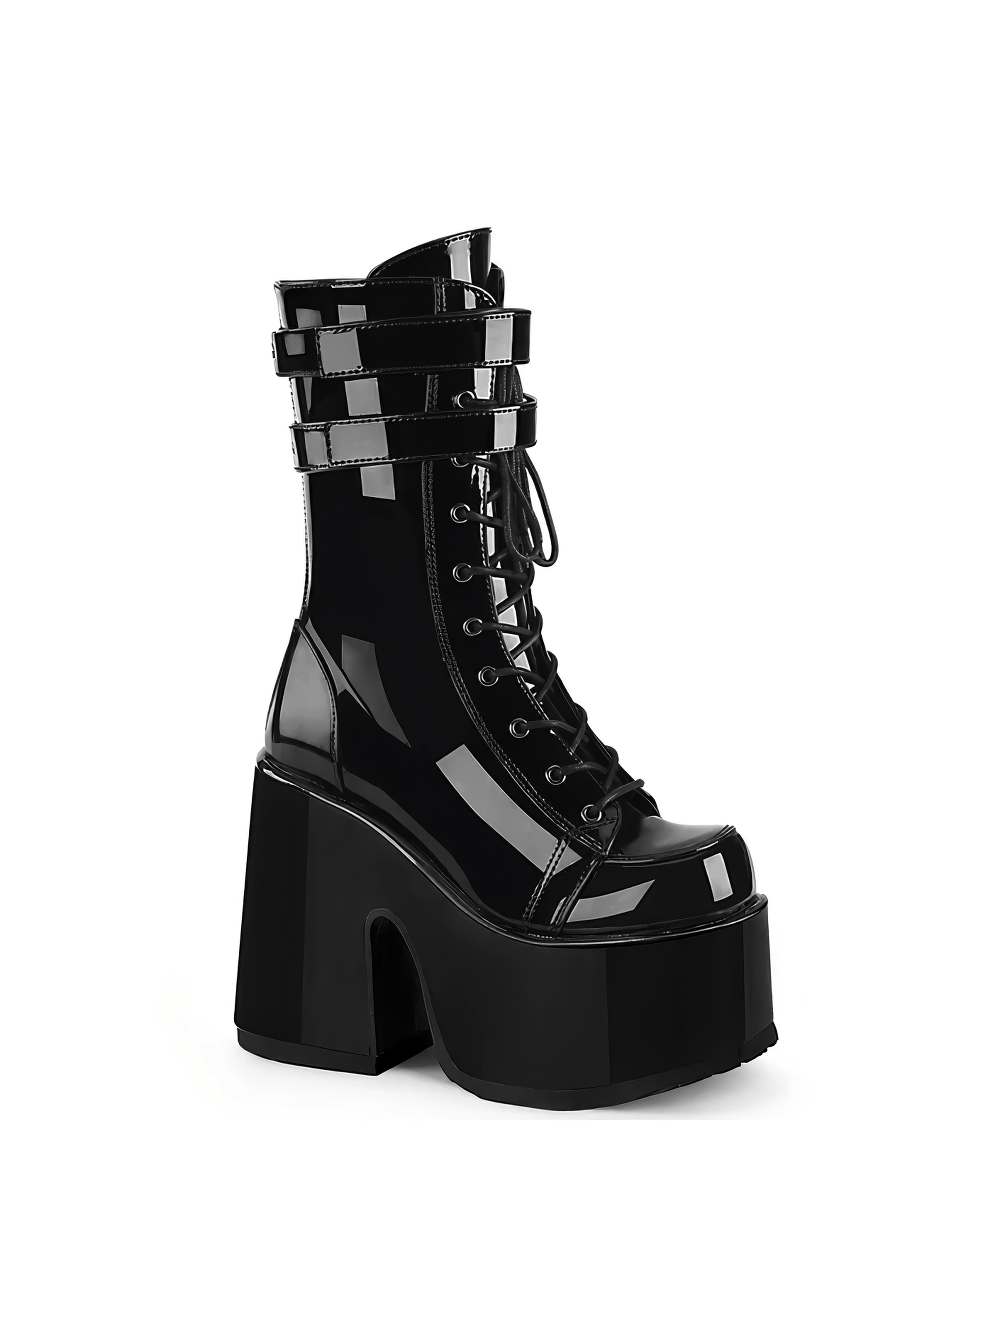 DEMONIA Women's Mid-Calf Patent Leather Boots with Straps